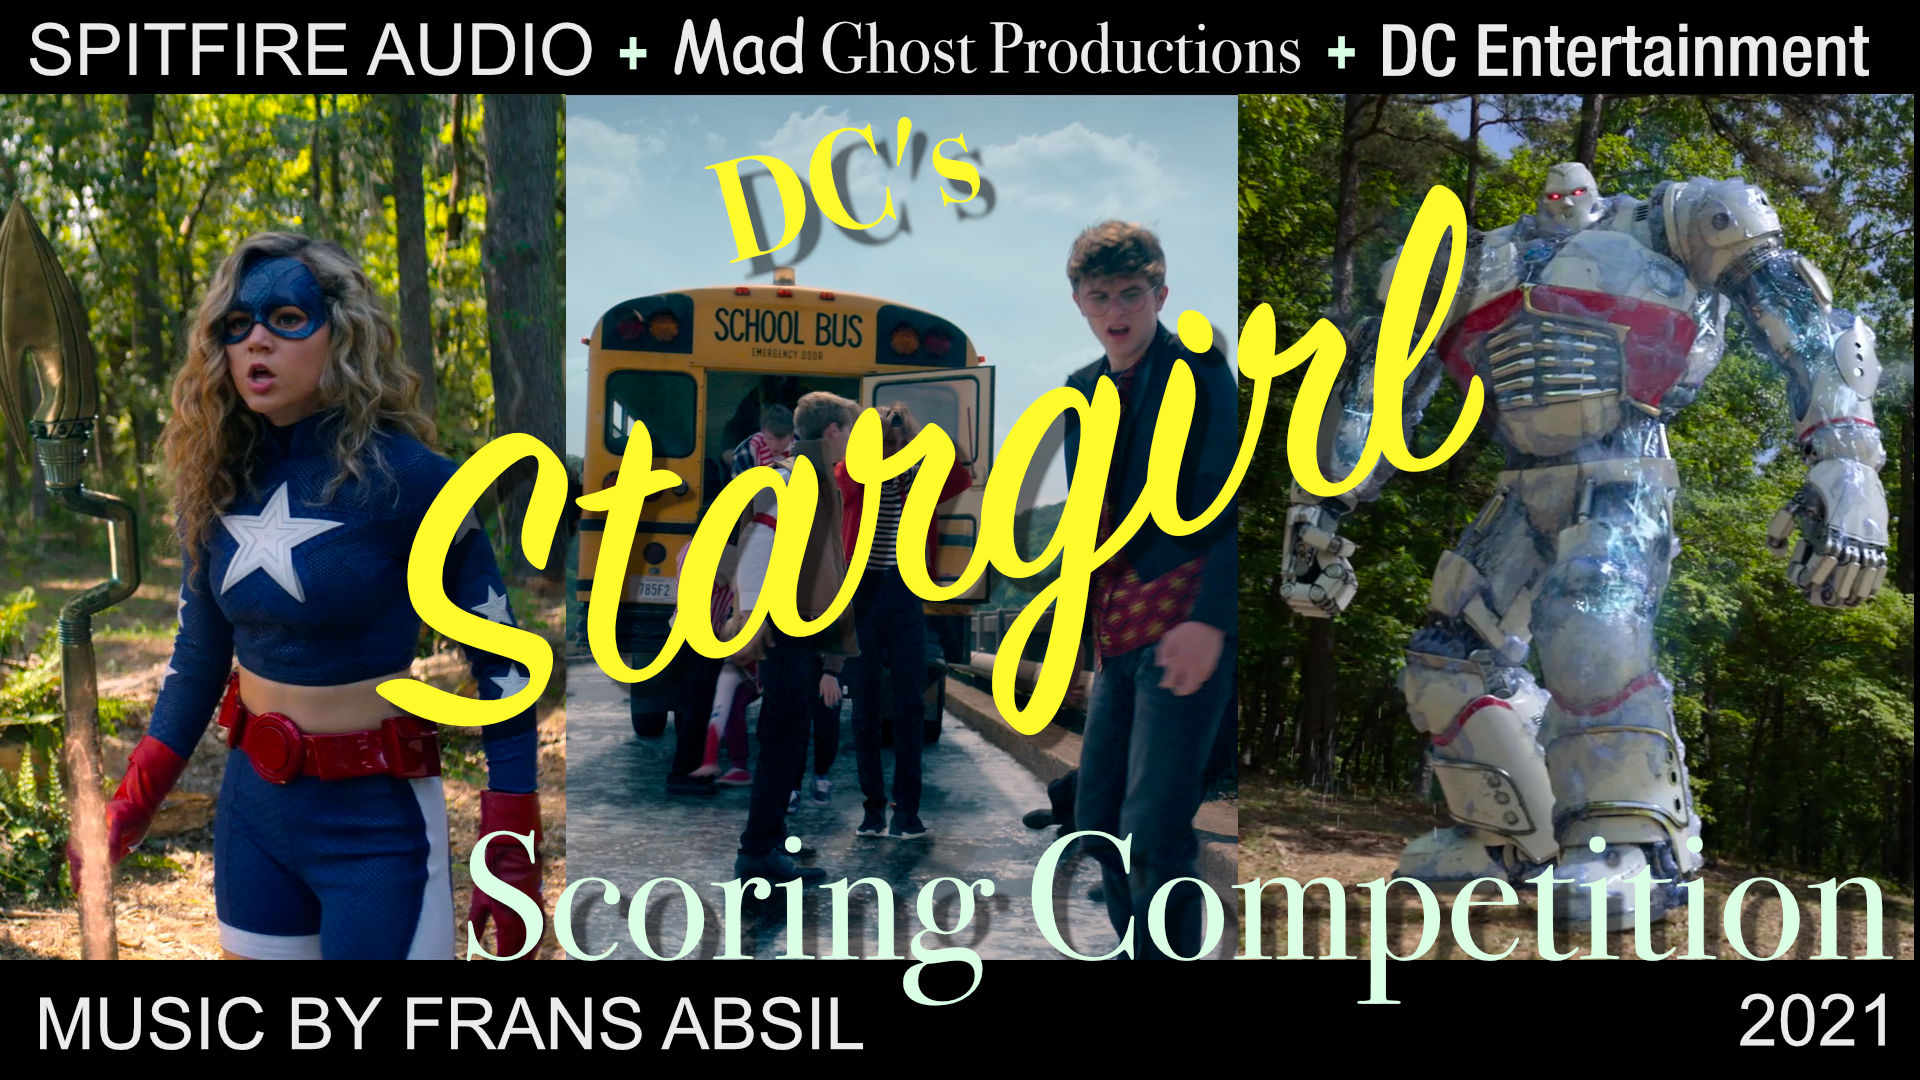 YouTube thumbnail for the Spitfire Audio Stargirl scoring contest video